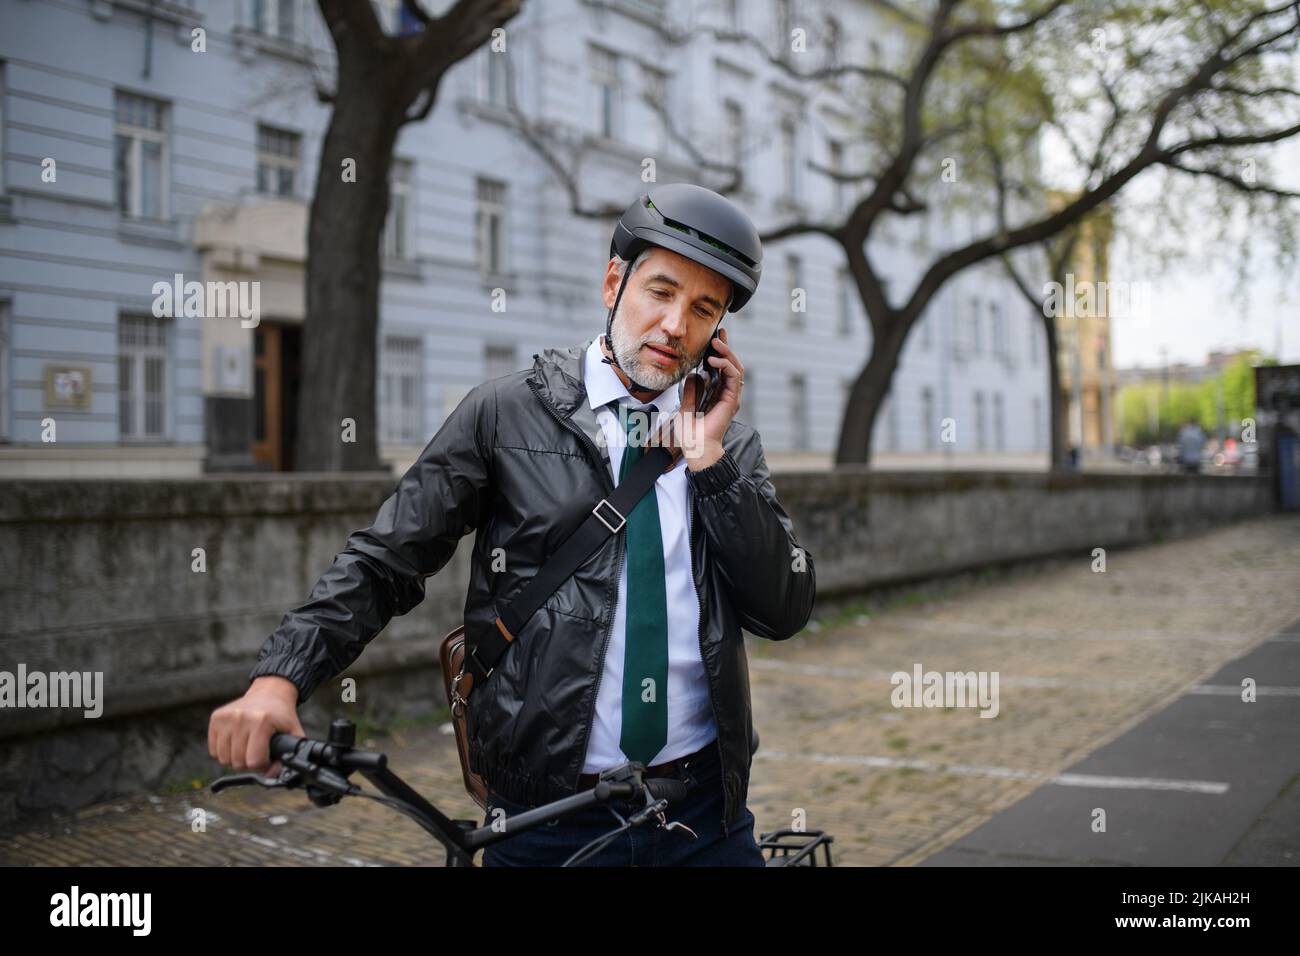 Portrait of businessman commuter on the way to work, pushing bike and calling on mobile phone, sustainable lifestyle concept. Stock Photo